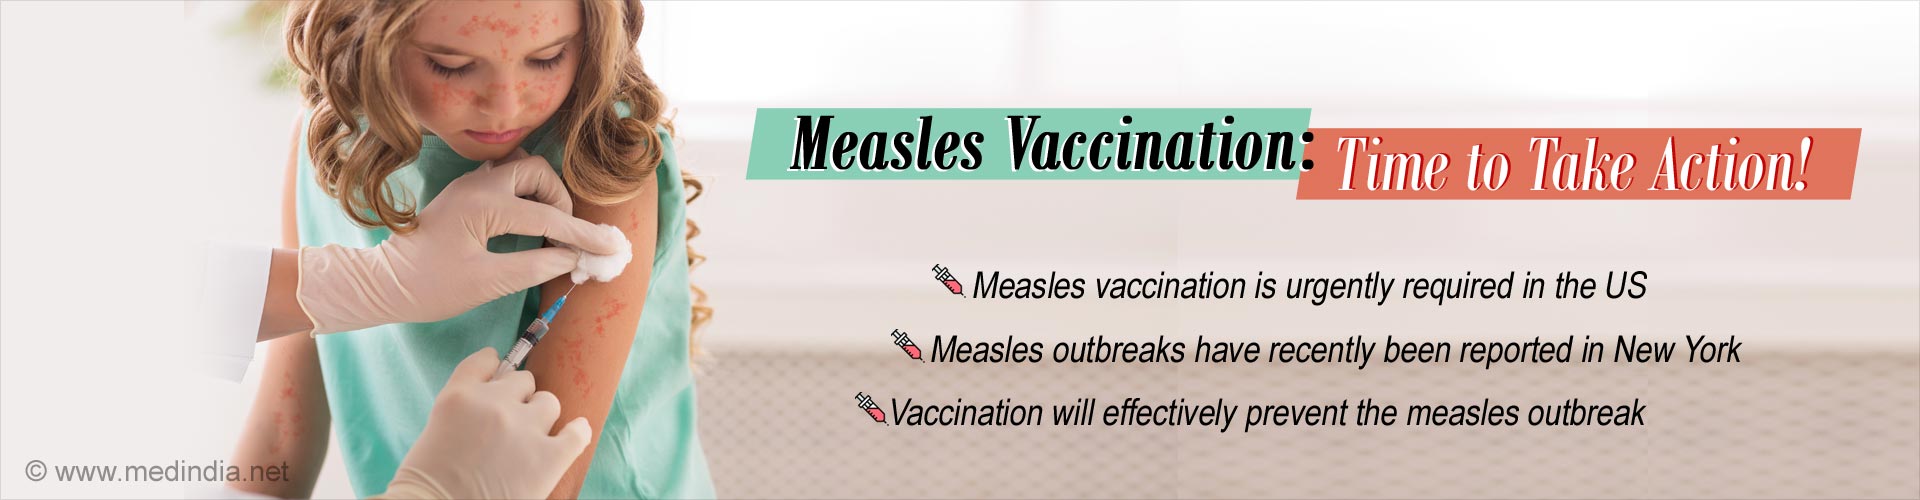 Measles Vaccination: Time to Take Action.Measles vaccination is urgently required in the US. Measles outbreaks have recently been reported in New York. Vaccination will effectively prevent the measles outbreaks.